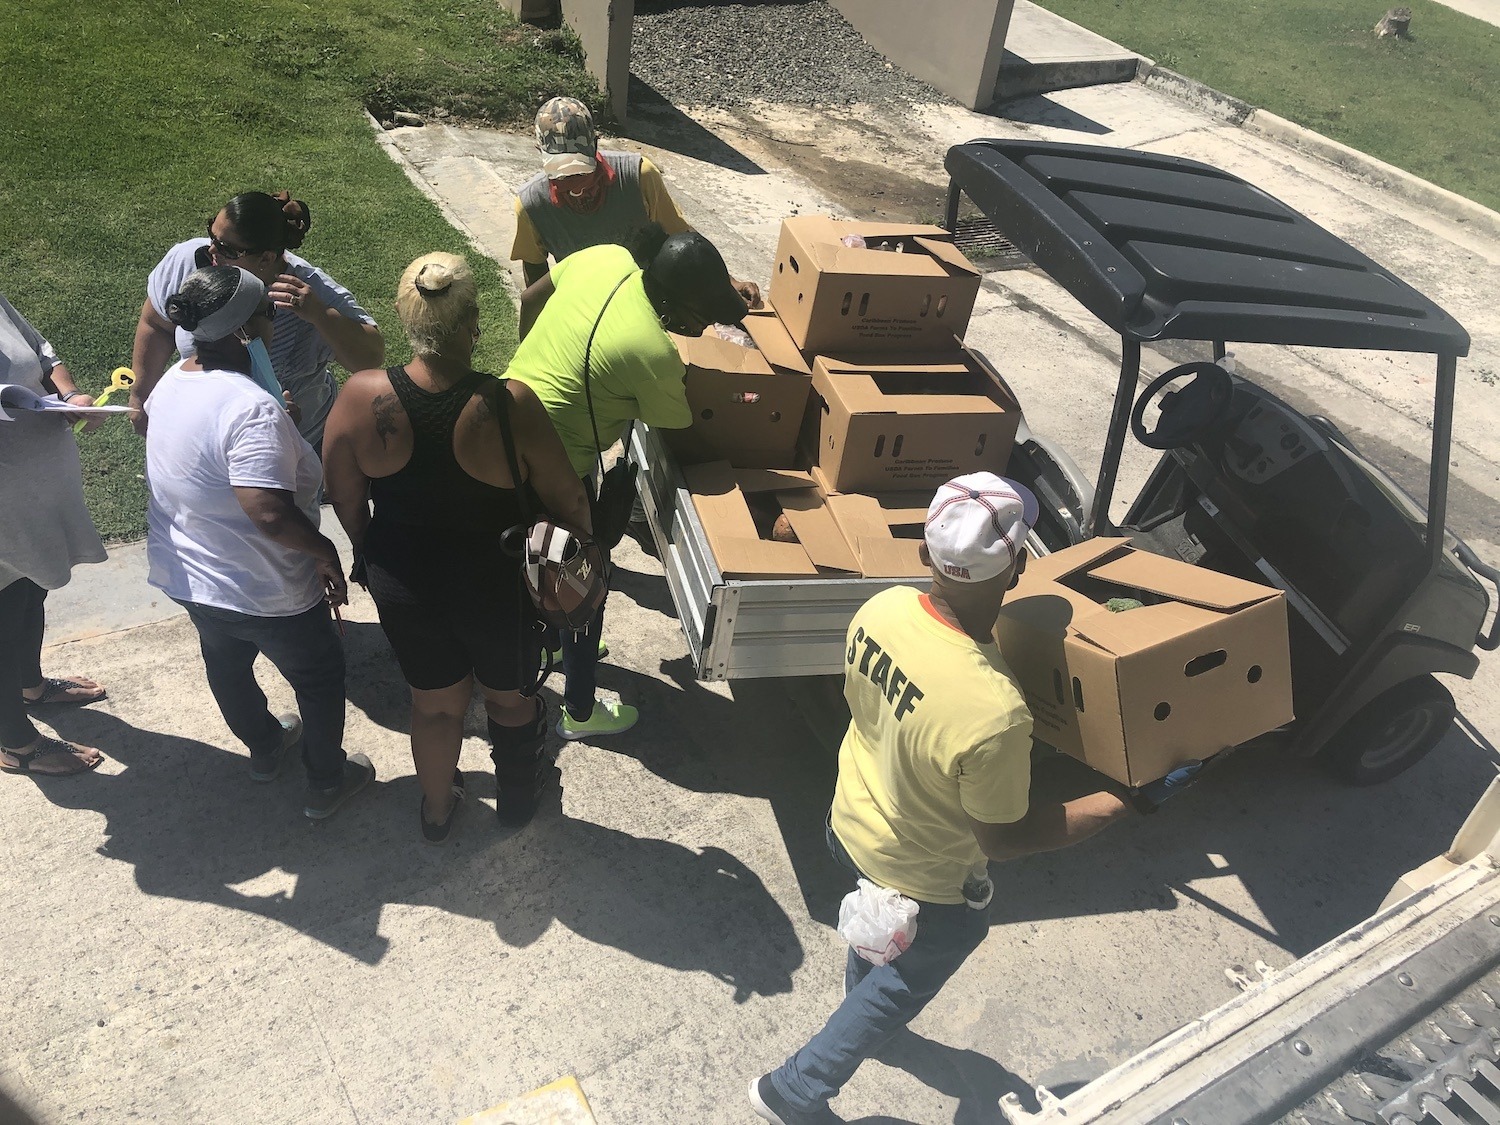 Volunteers load food boxes onto a golf cart to distribute in the Manuel A. Perez Housing Project June 2020